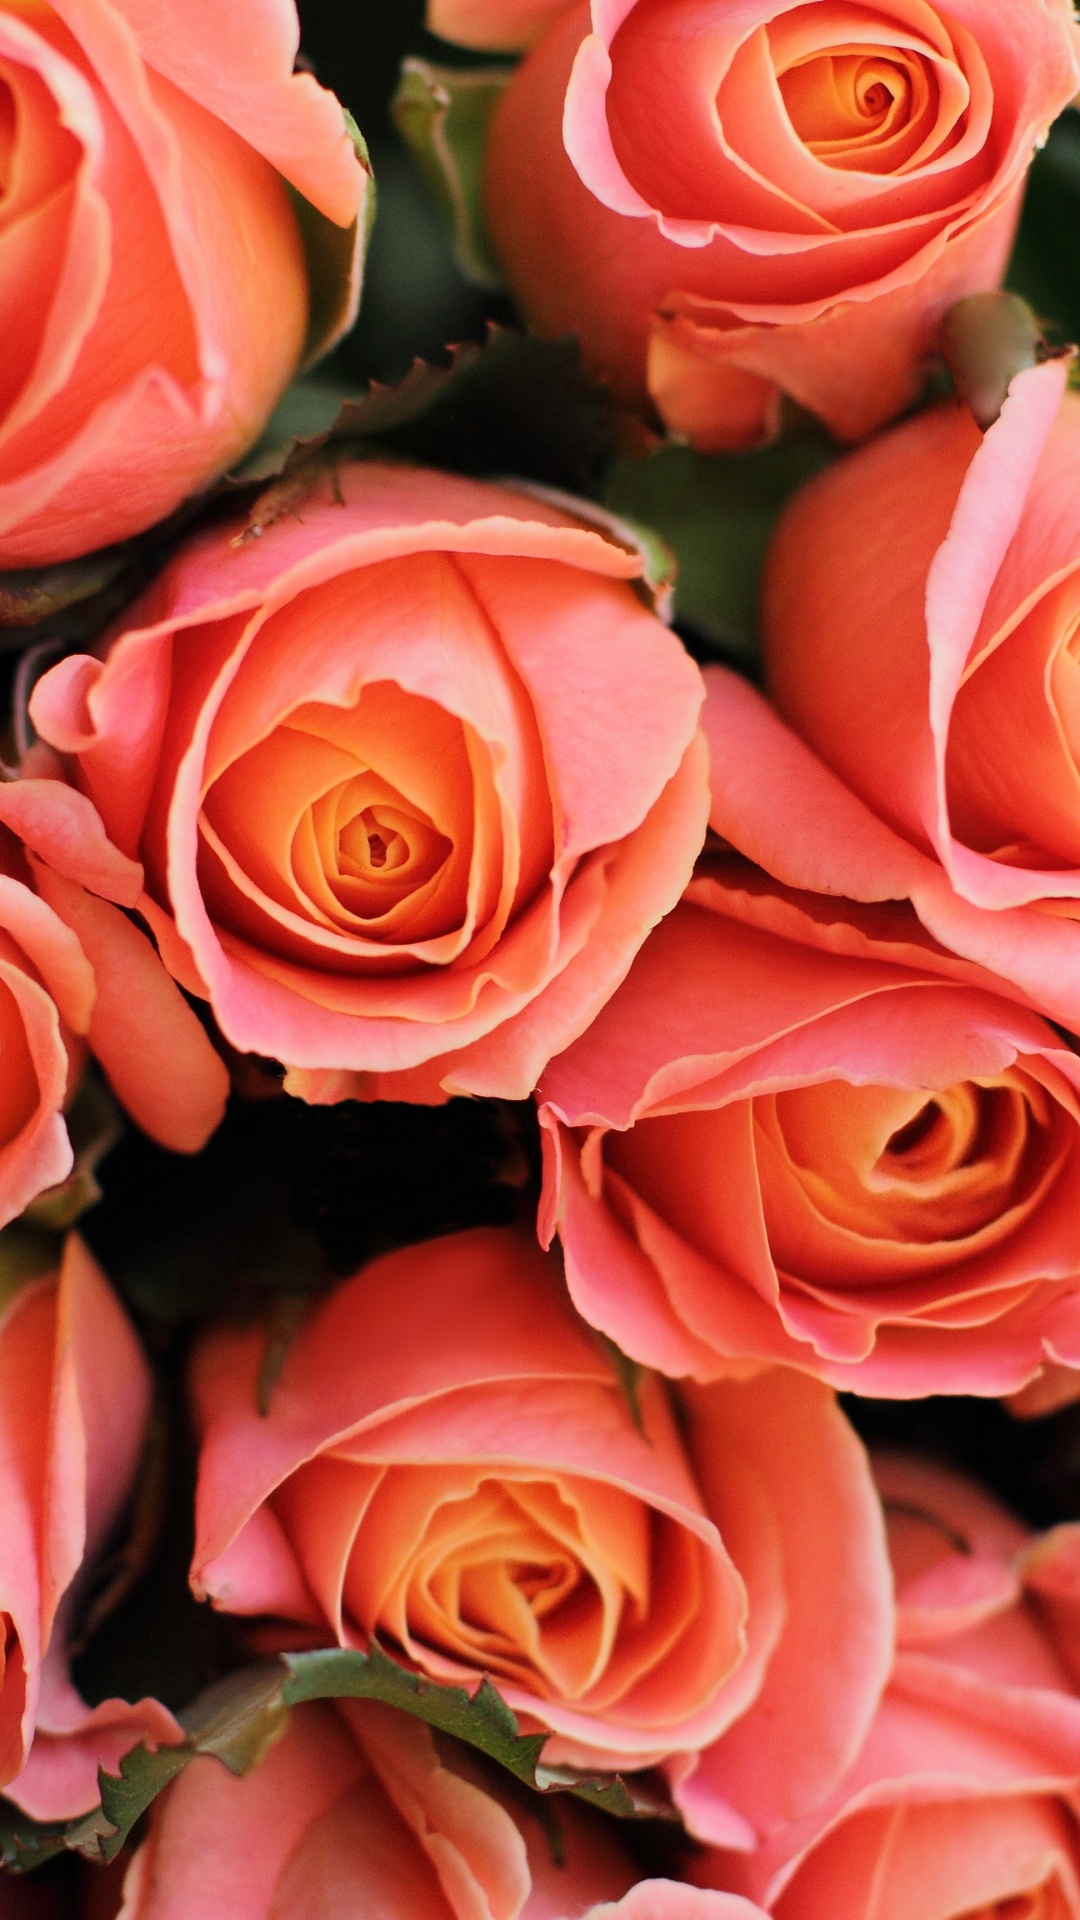 Pink Roses in Close up Photography. Wallpaper in 1080x1920 Resolution